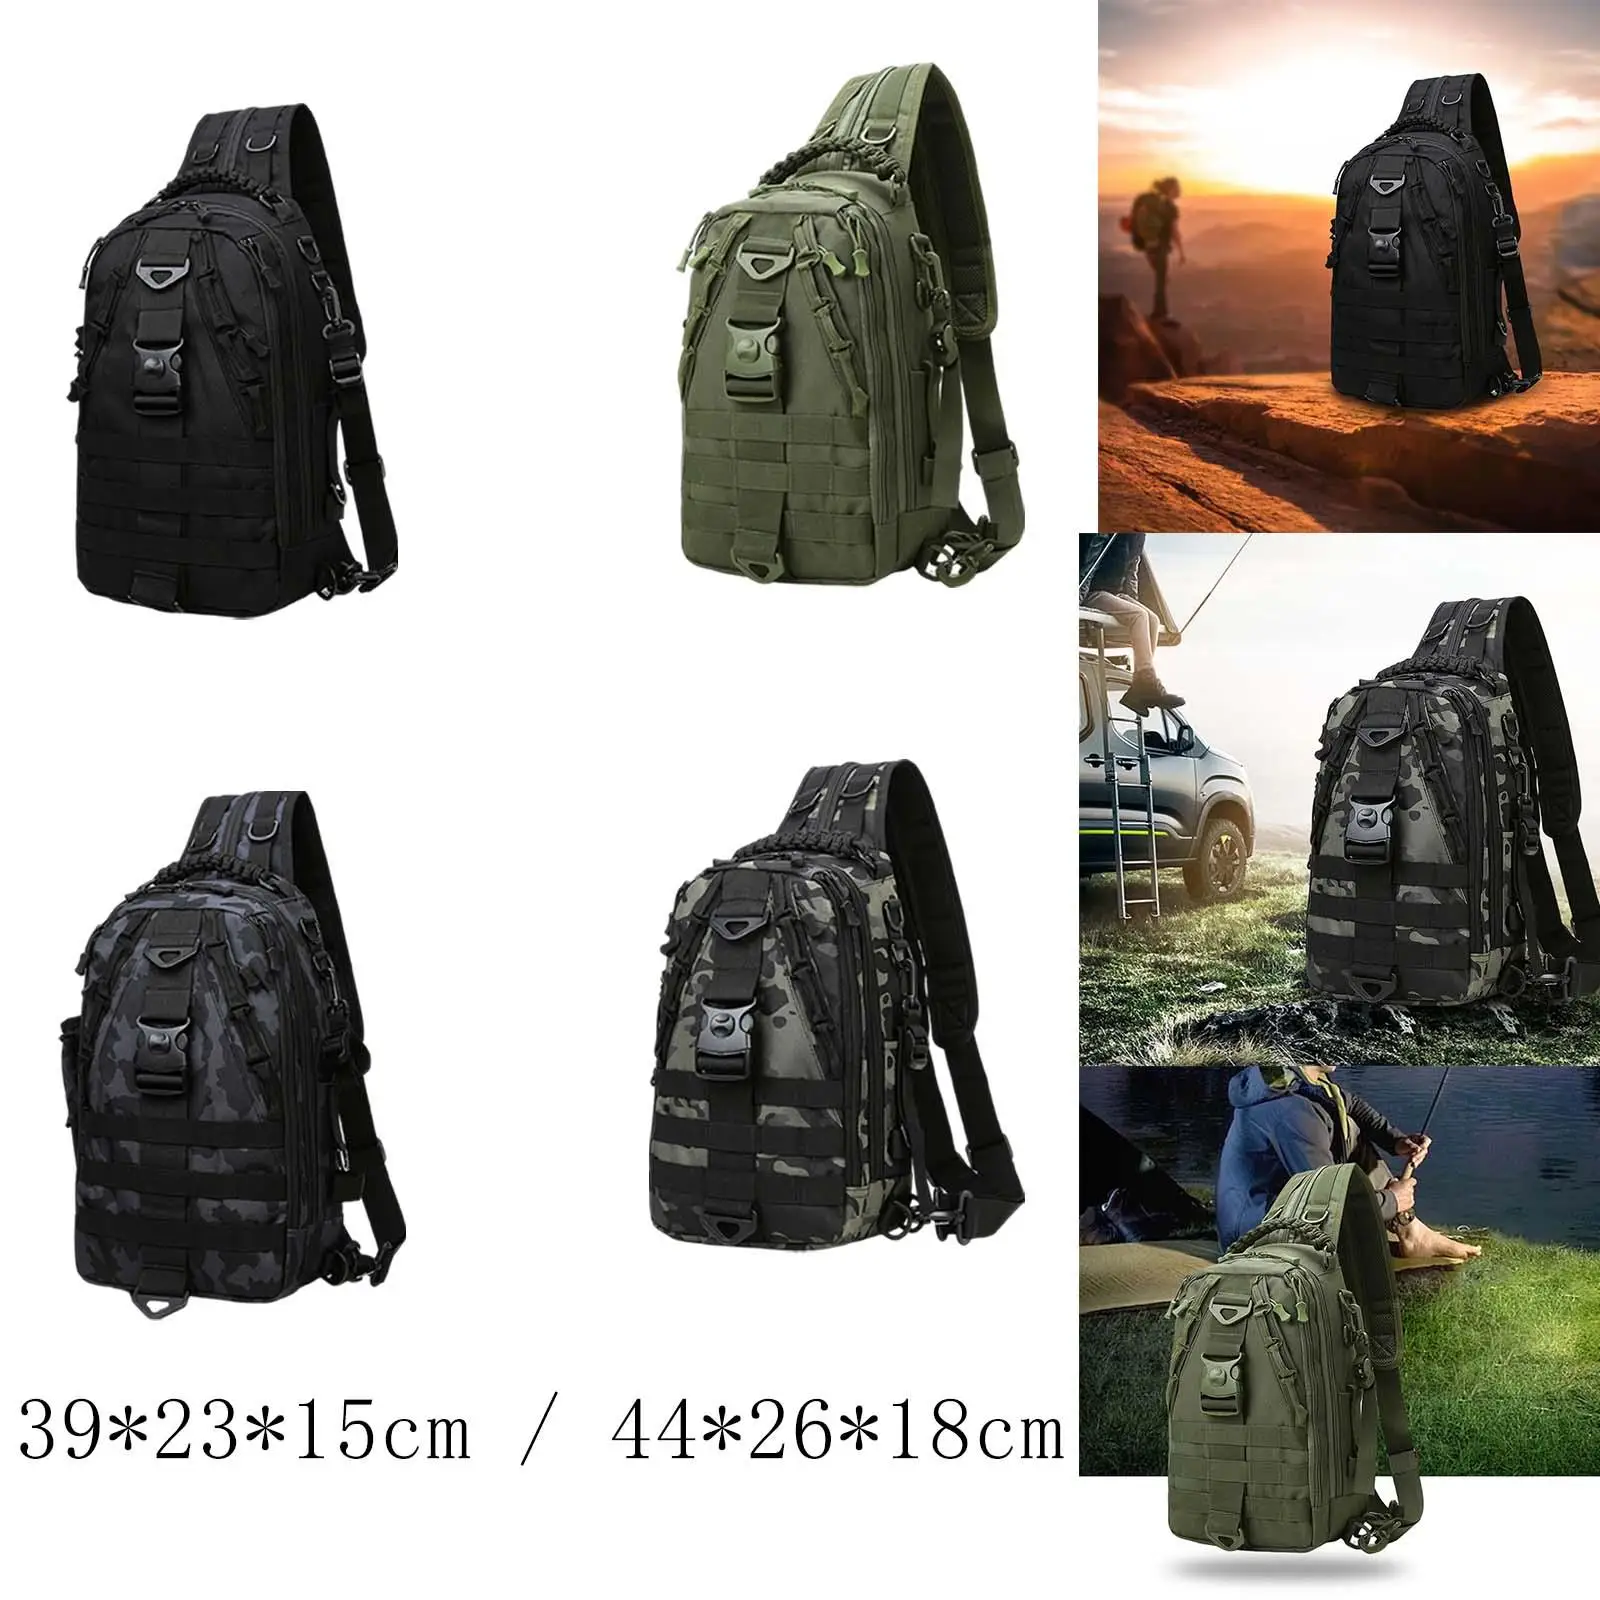 Fishing Backpack Daysack Portable Rucksack with Rod Holders Fishing Tackle Bag for Outdoor Sport Hiking Hunting Camping Fishing